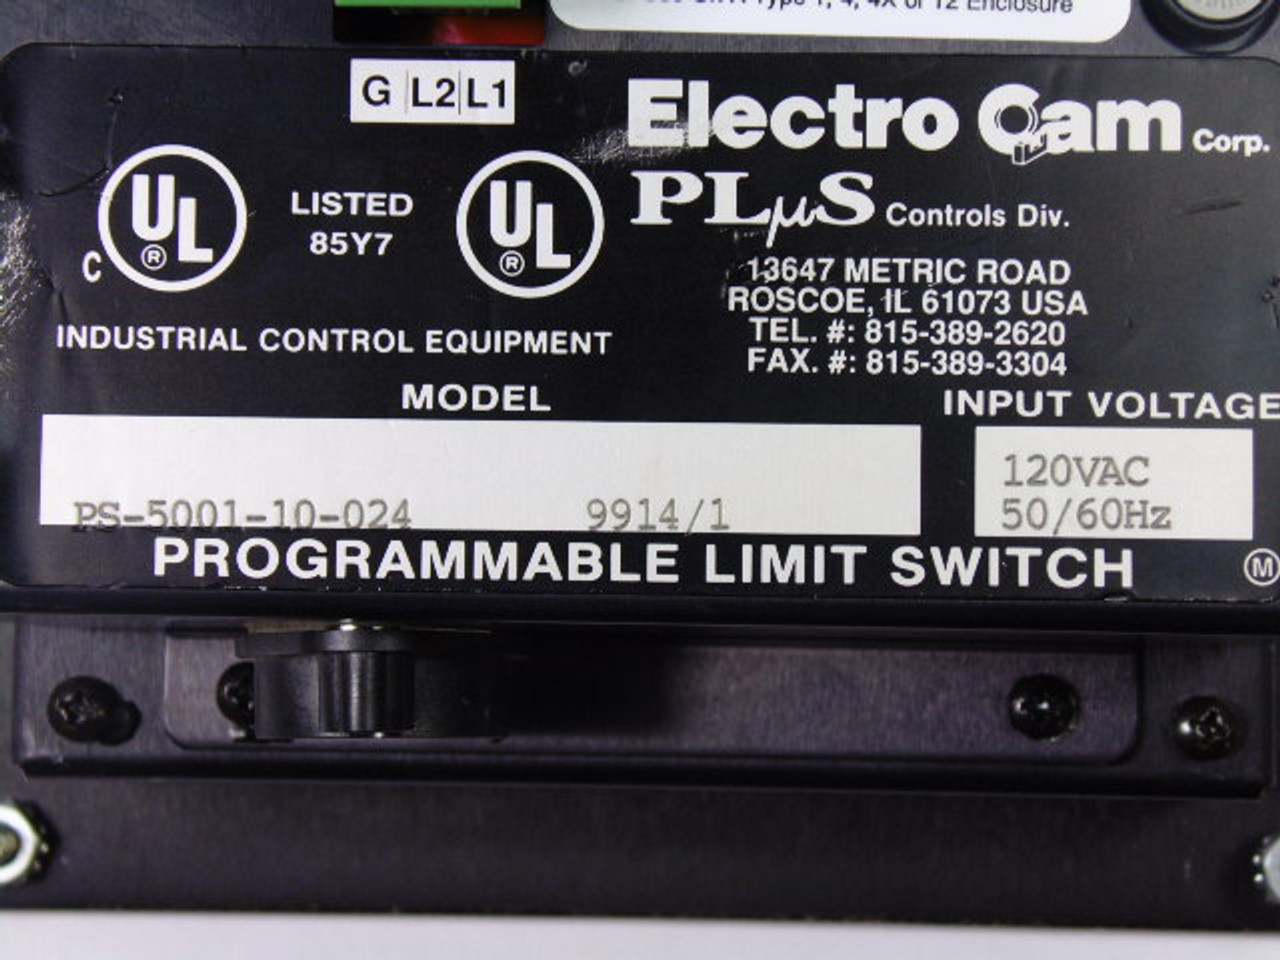 Electro Cam PS-5001-10-024 Programmable Limit Switch 120VAC 50-60Hz USED